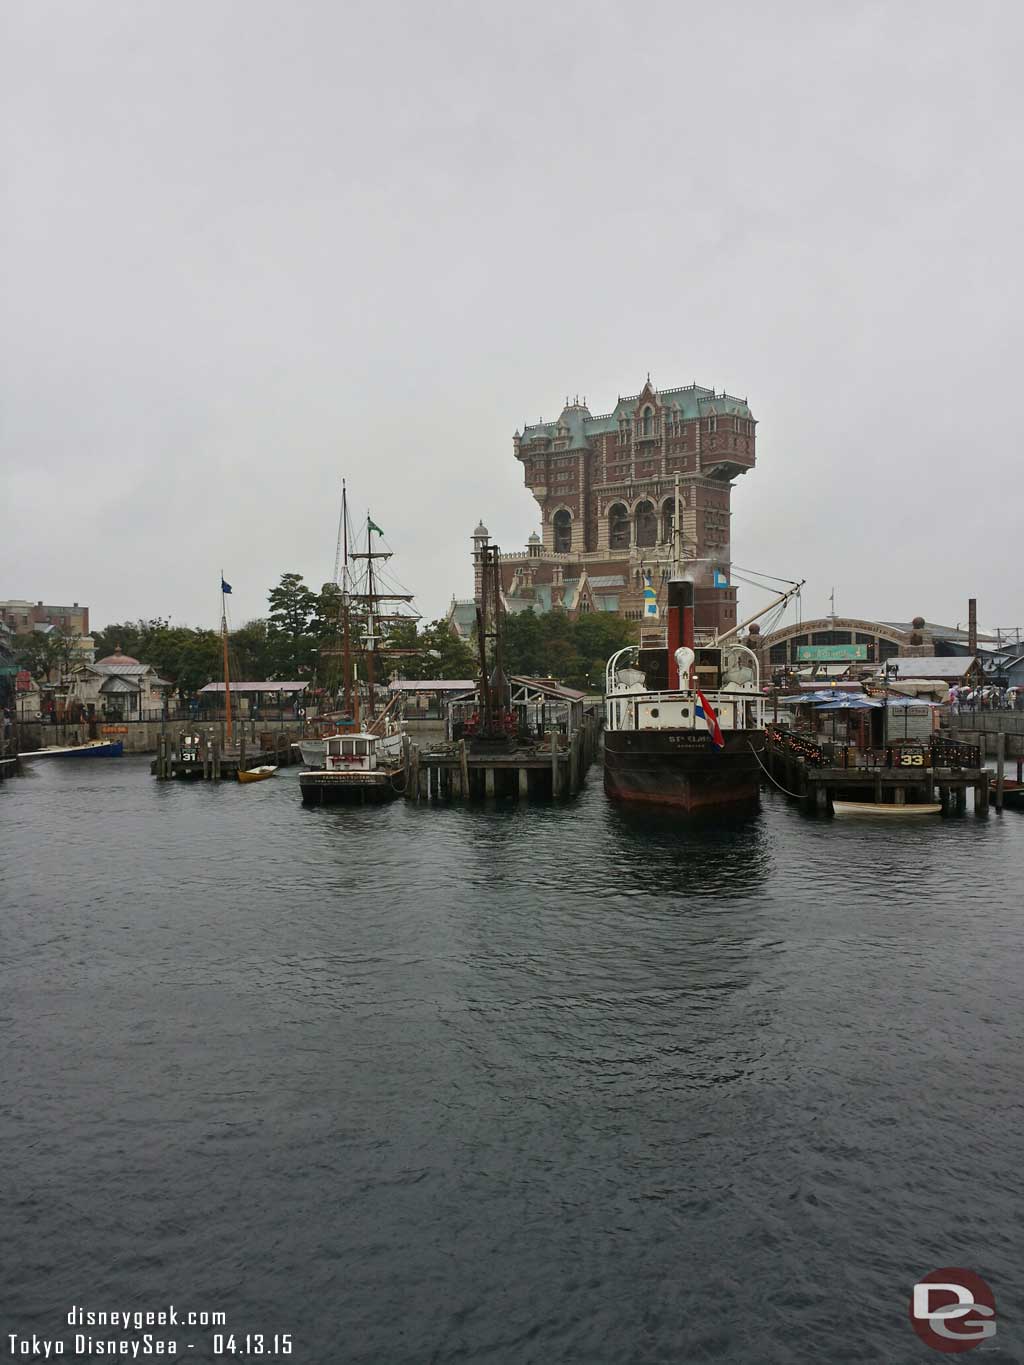 Another view of the American Waterfront in Tokyo DisneySea